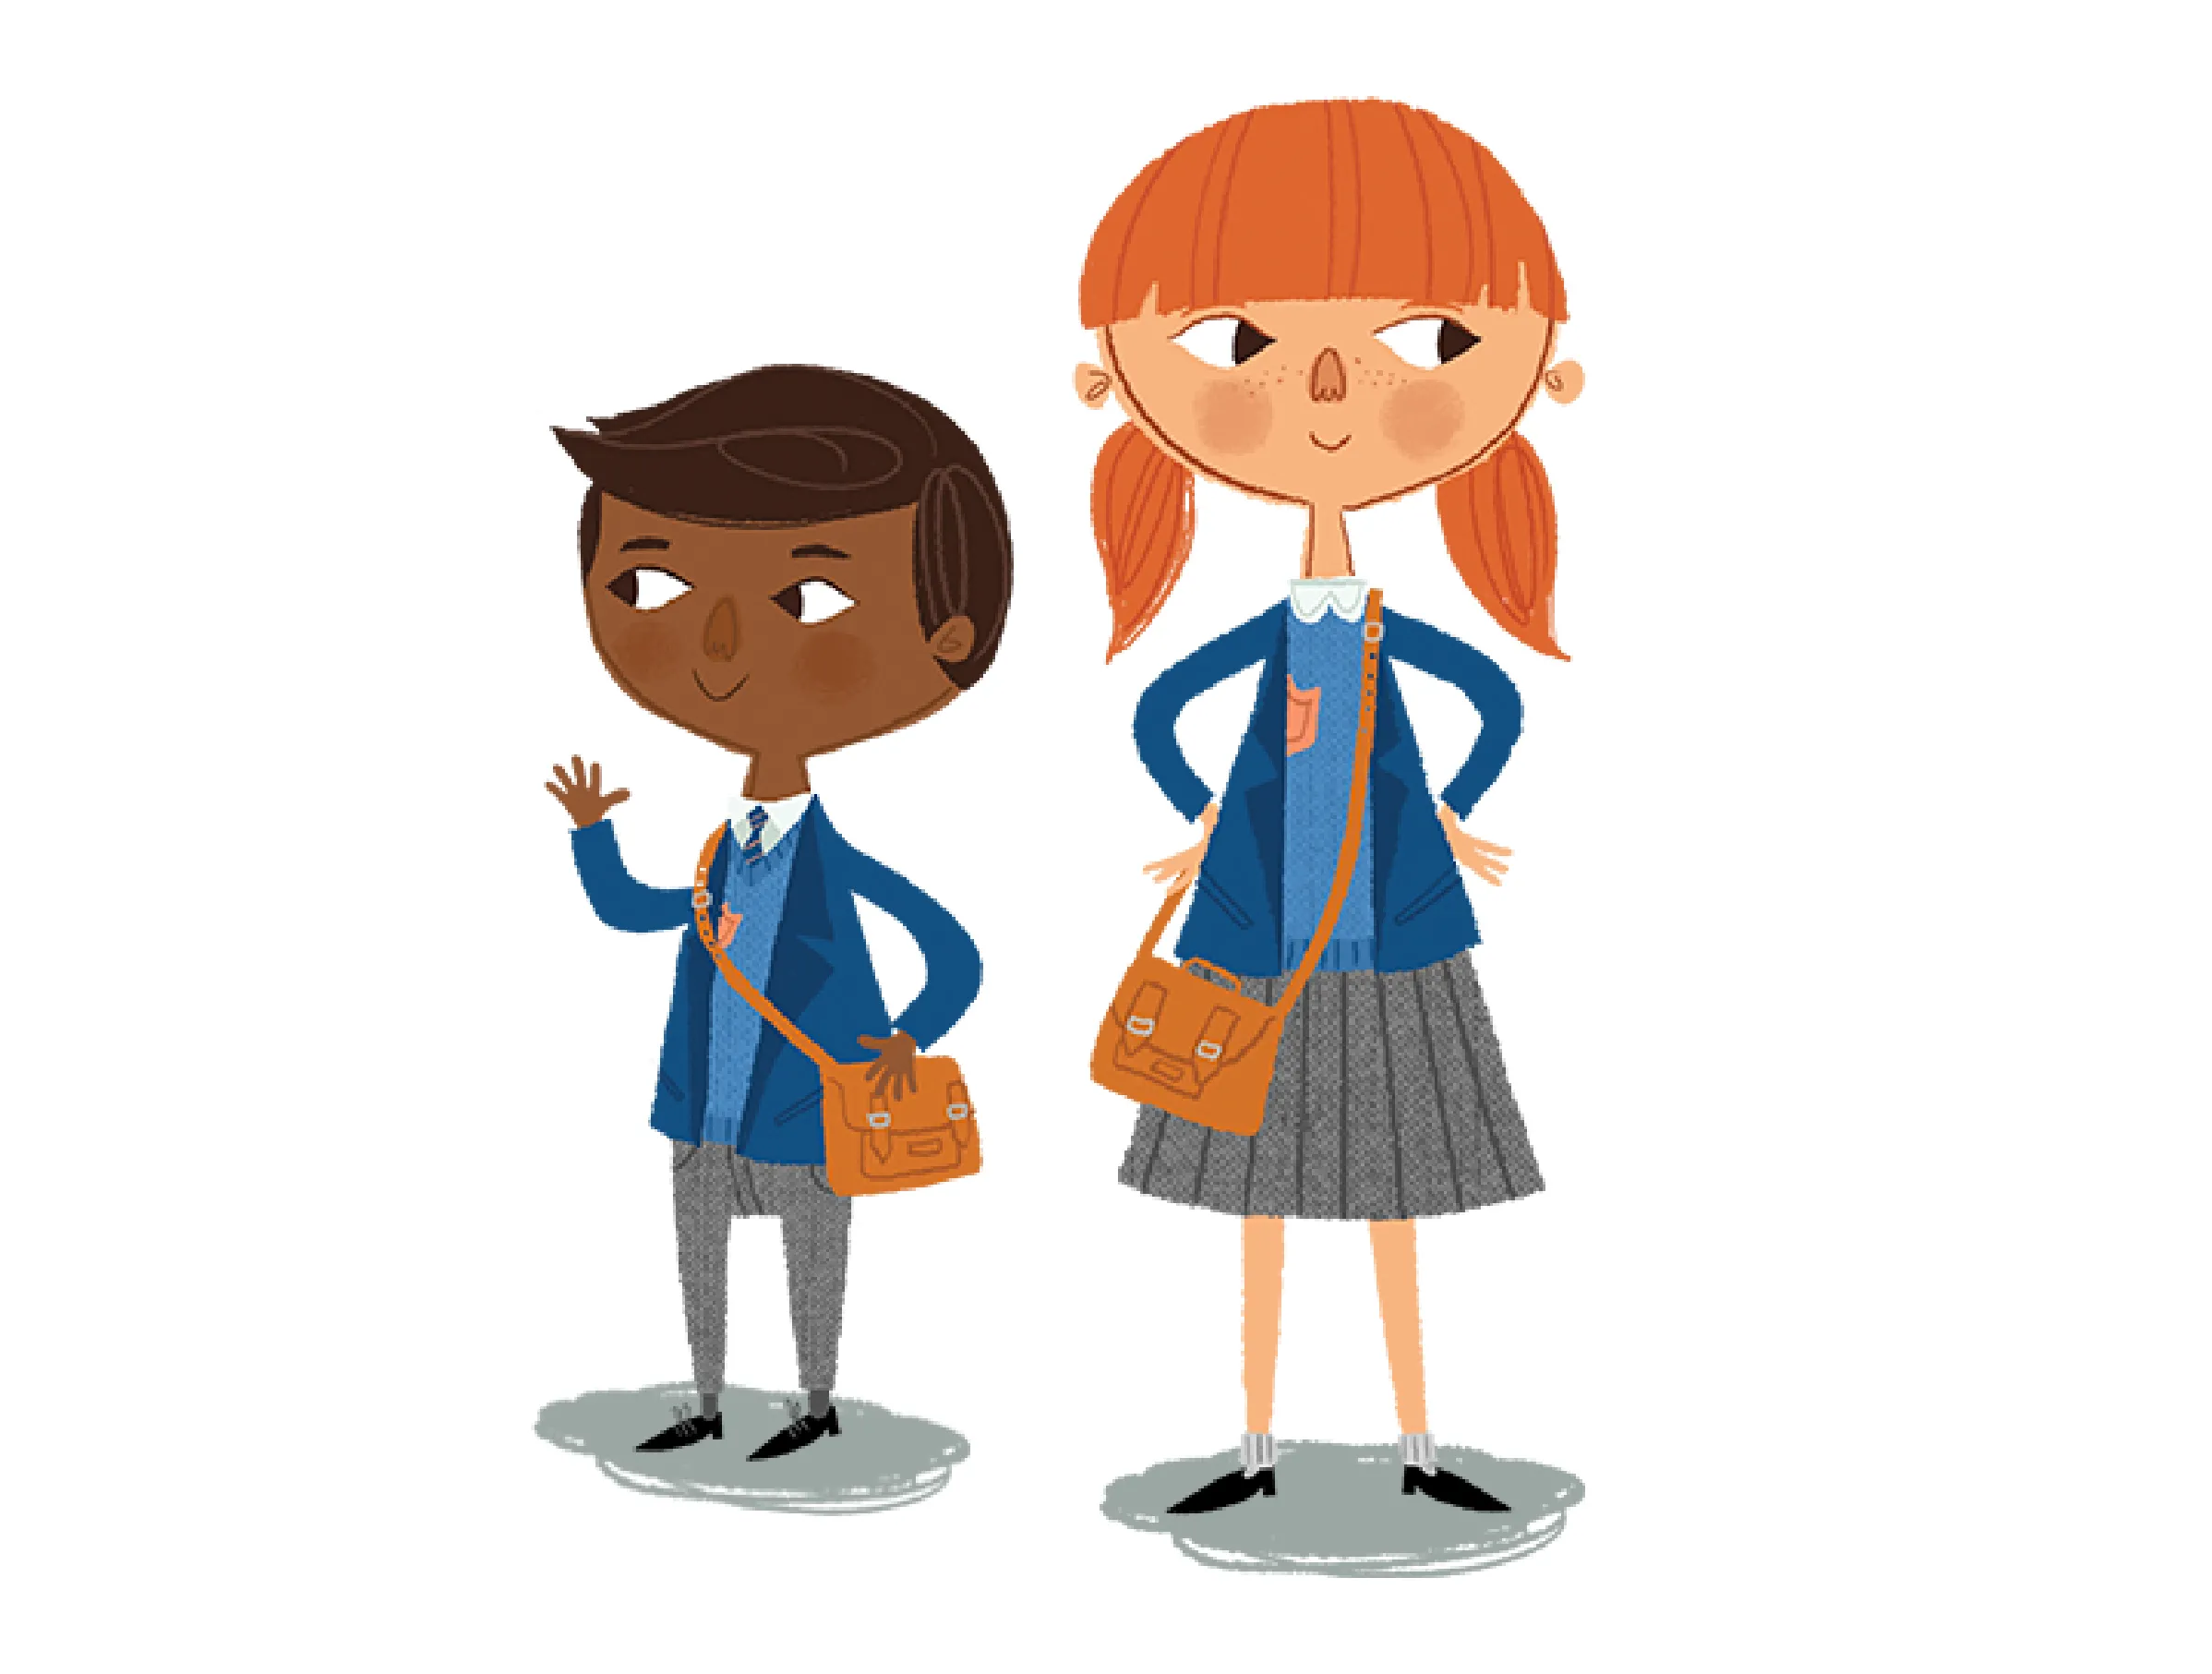 PFEG Young Money illustrated characters of two school children